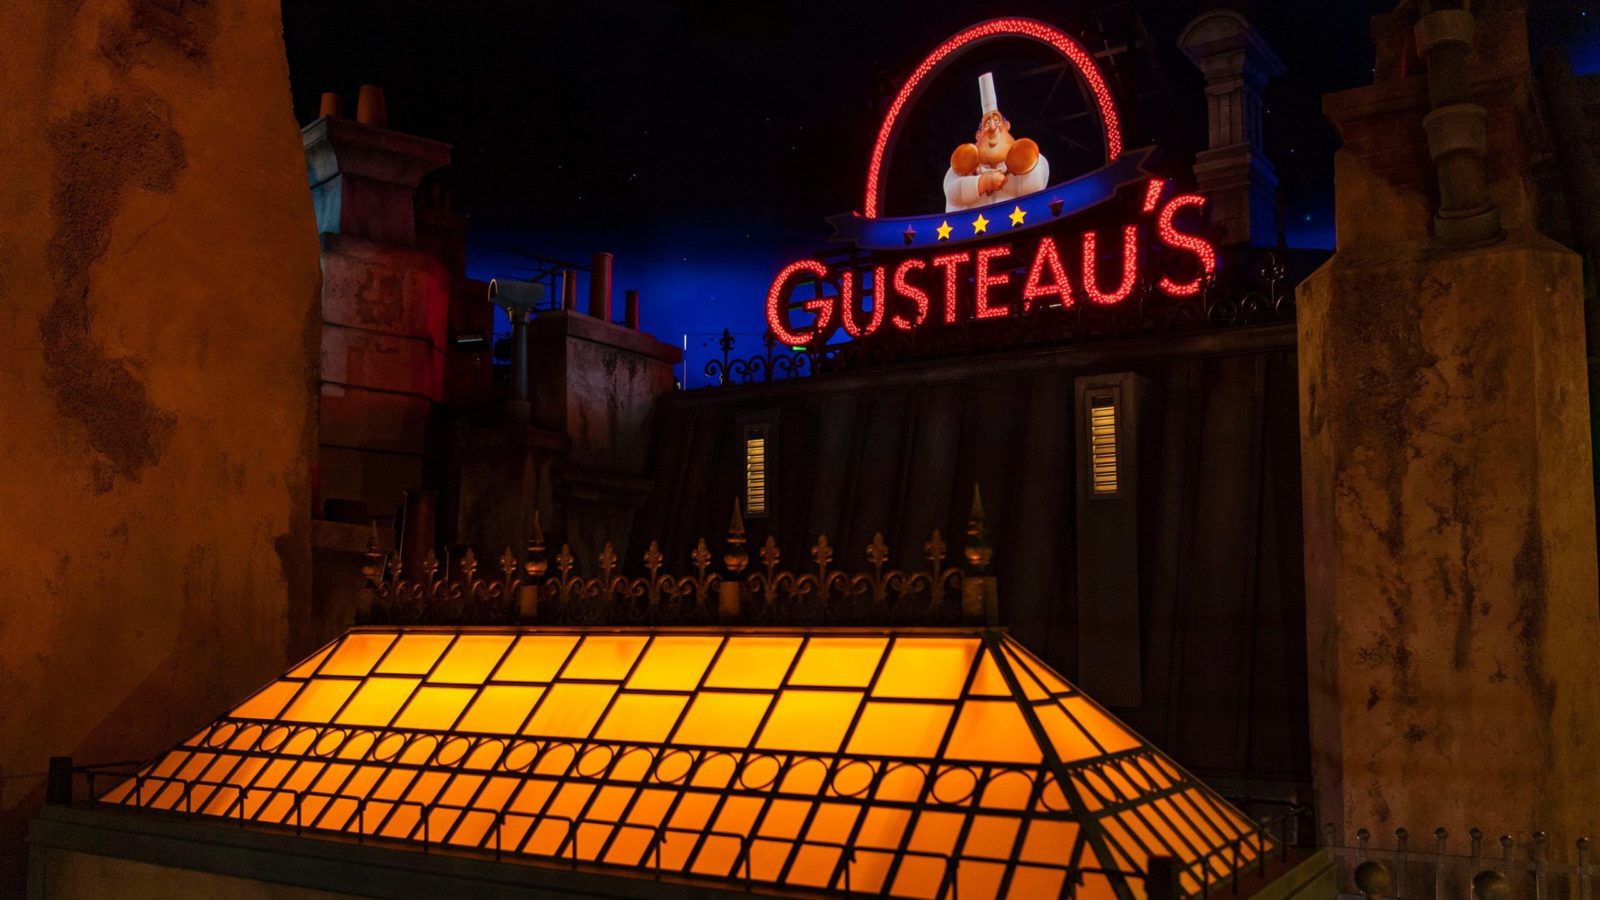 Remy's Ratatouille Adventure at EPCOT: Gusteau magically invites guests to join Chef Remy for a special meal in the attraction queue for Remy’s Ratatouille Adventure at EPCOT at Walt Disney World Resort in Lake Buena Vista, Fla. (Matt Stroshane, photographer)